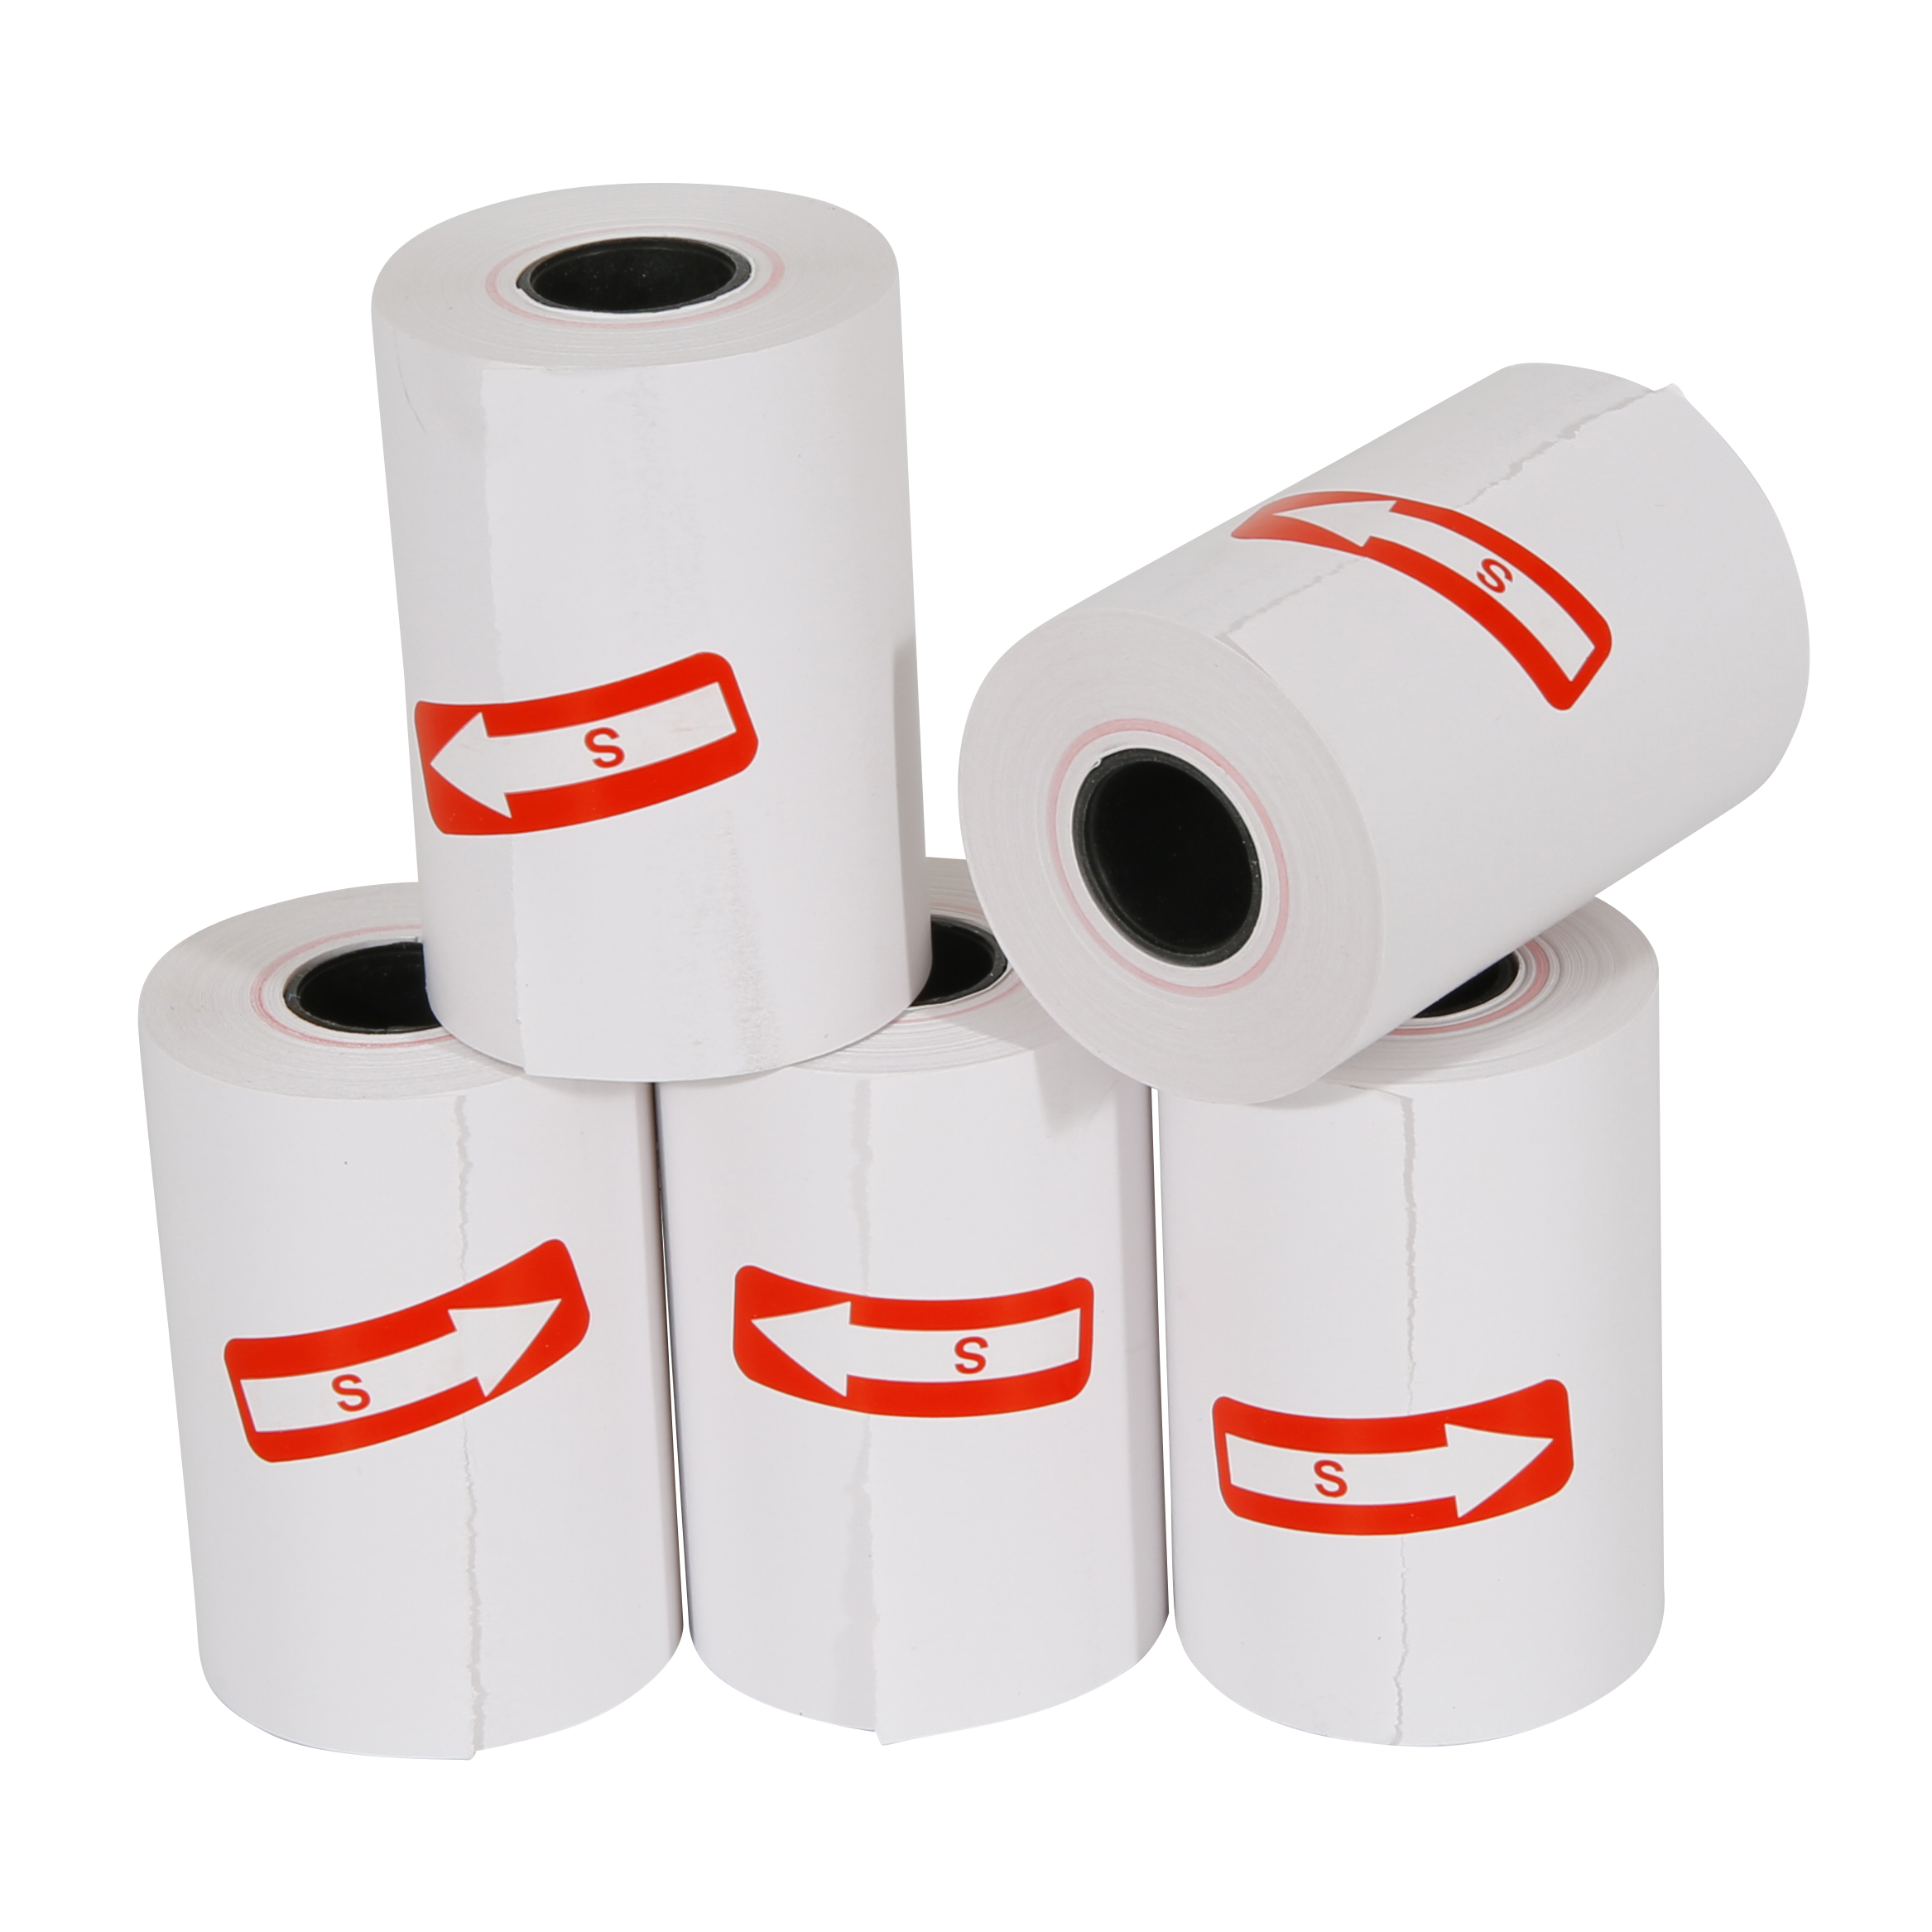 Special Price for Thermal Round Sticker Paper -...